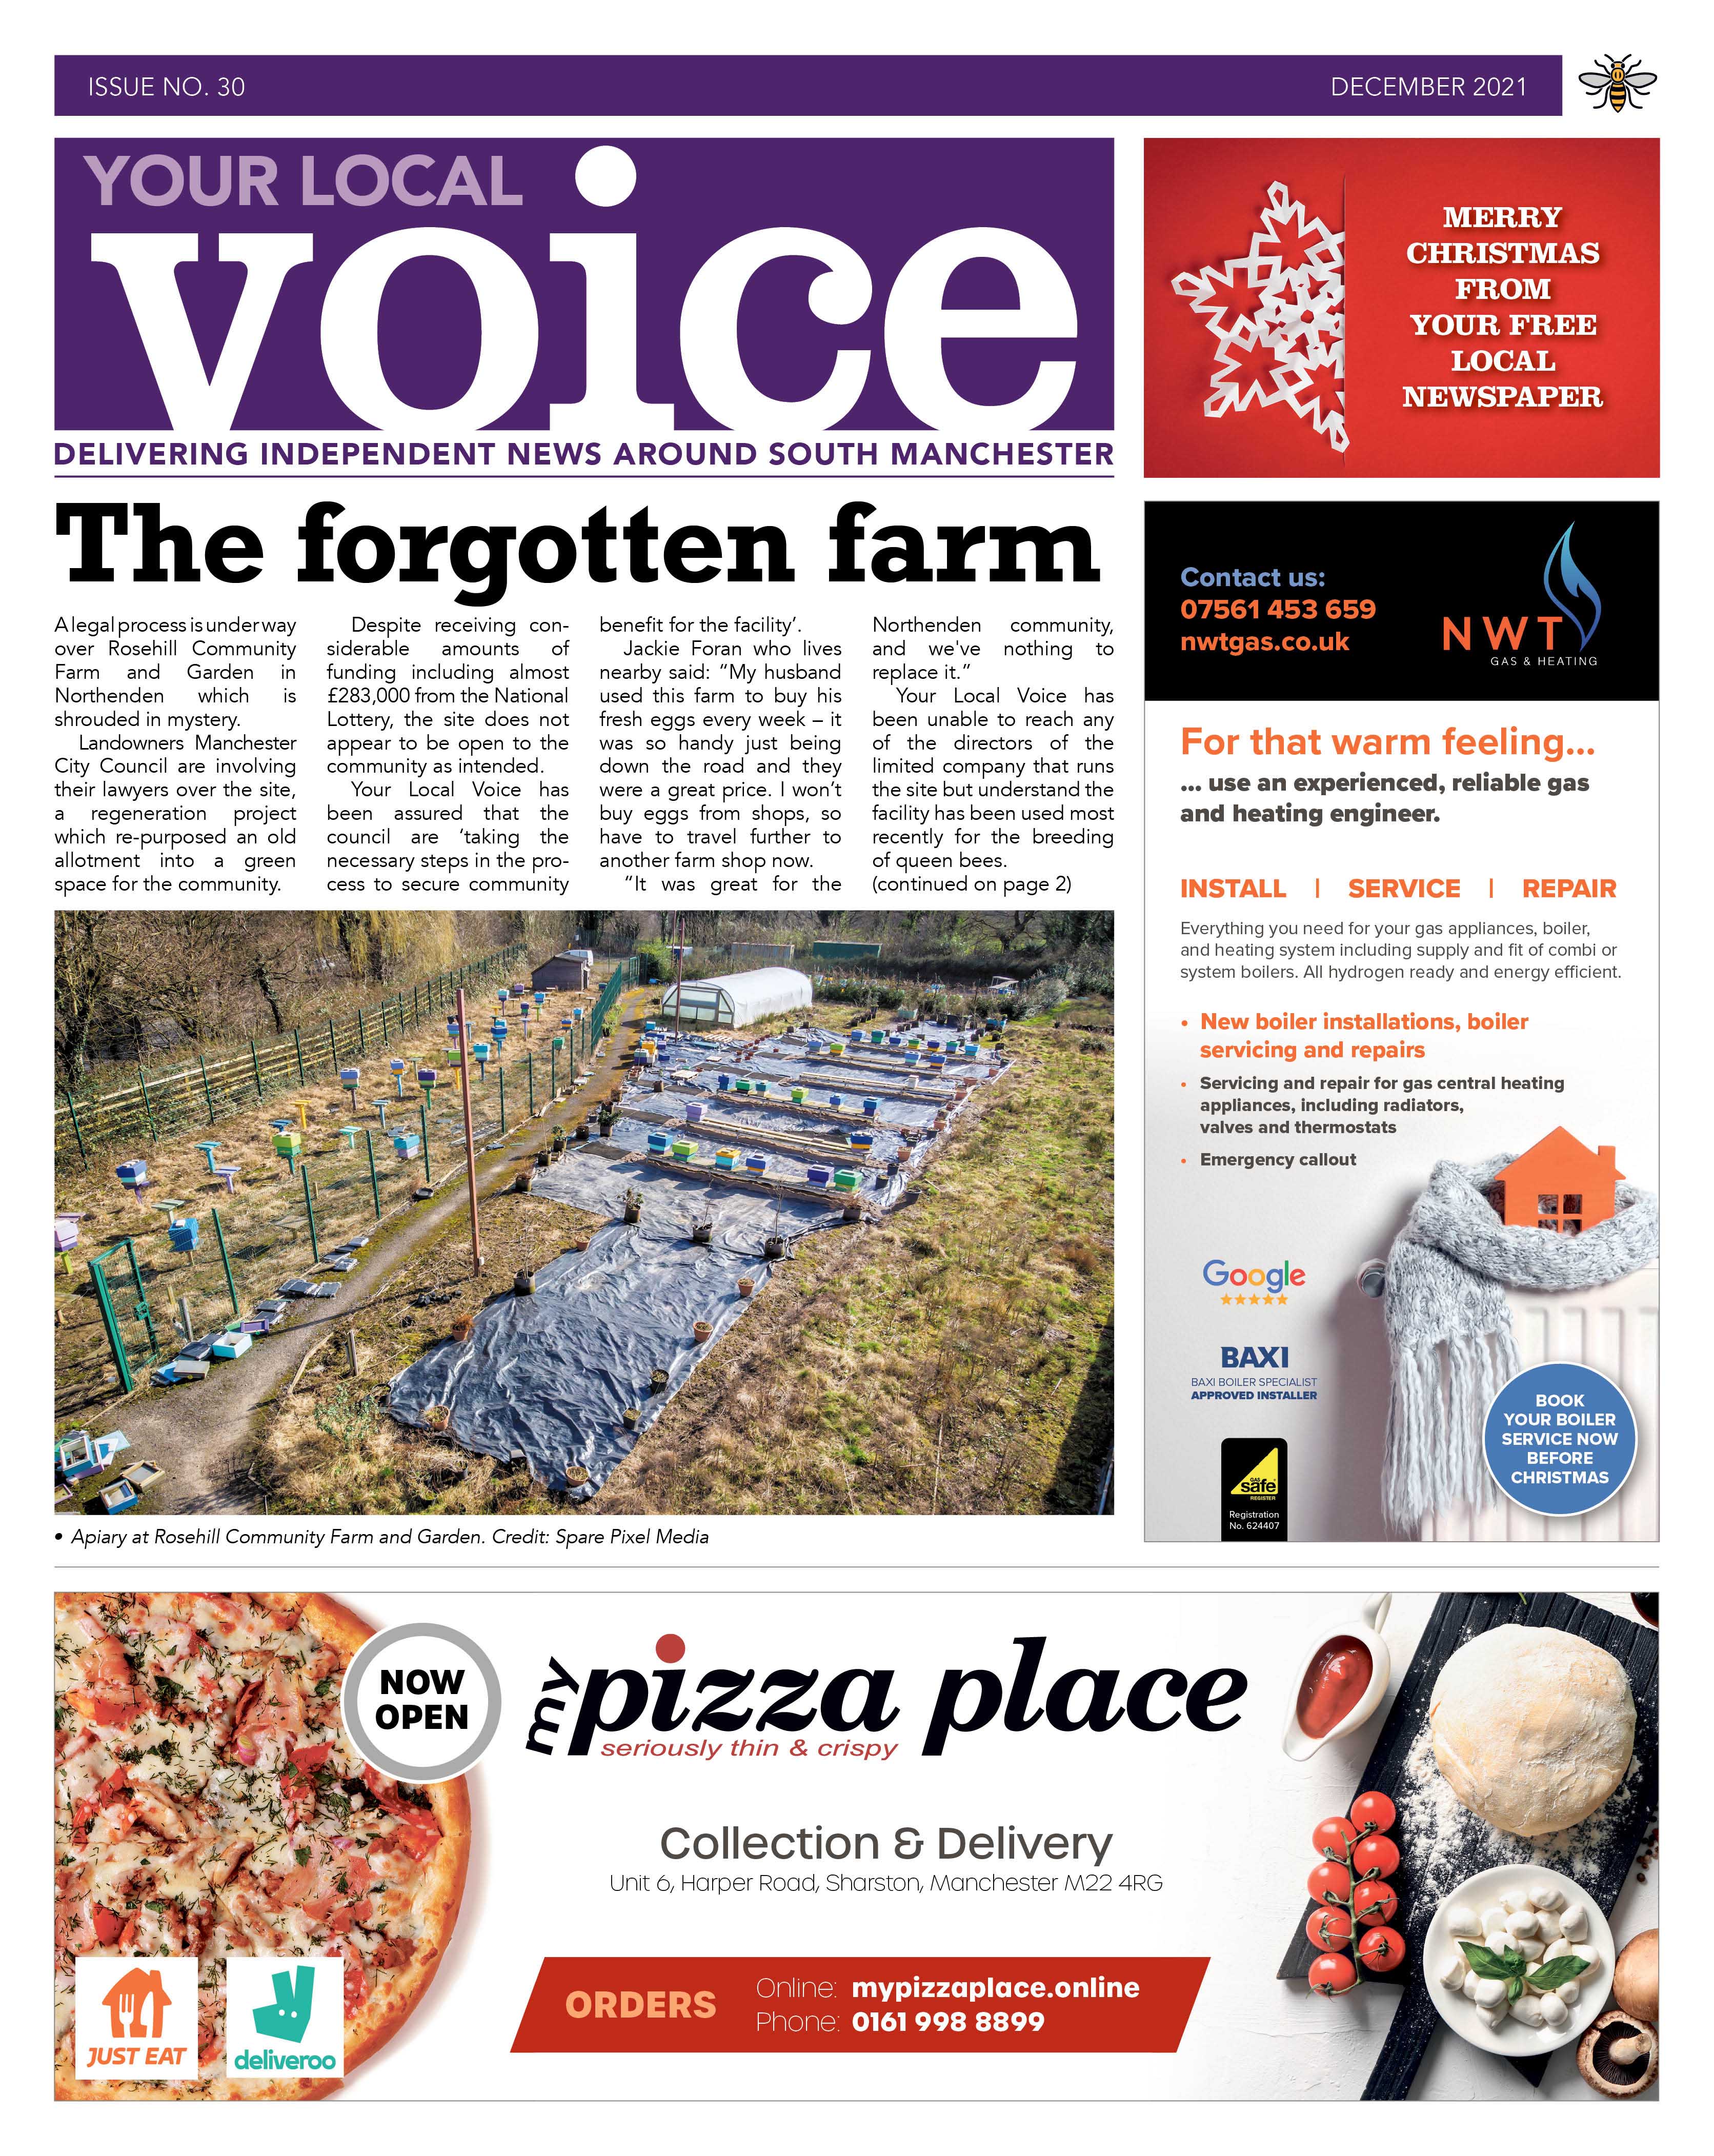 Your Local Voice newspaper issue 30